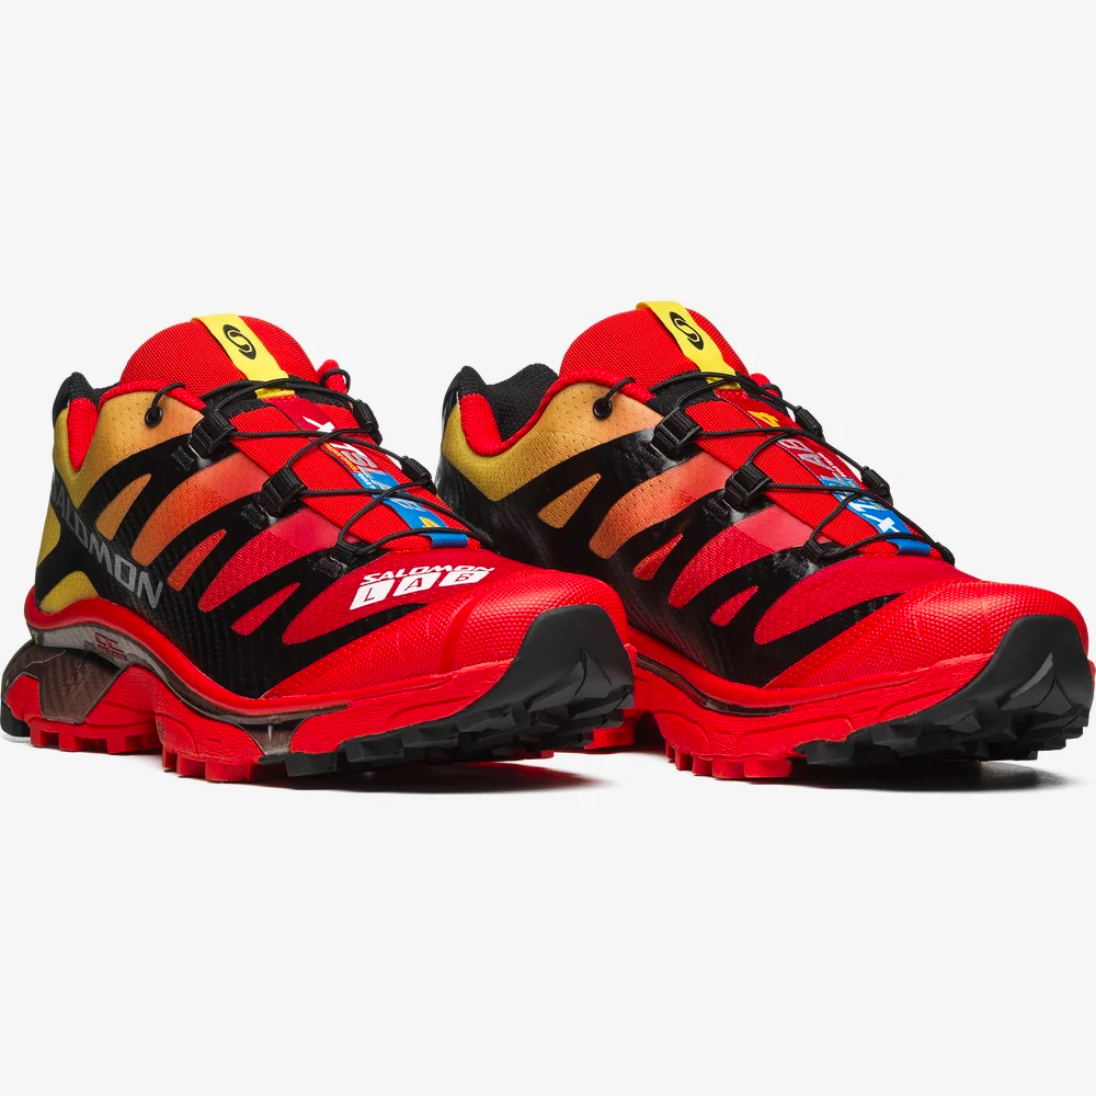 Side detail photo of the XT-4 OG - Fiery Red/ Black/ Empire Yellow.